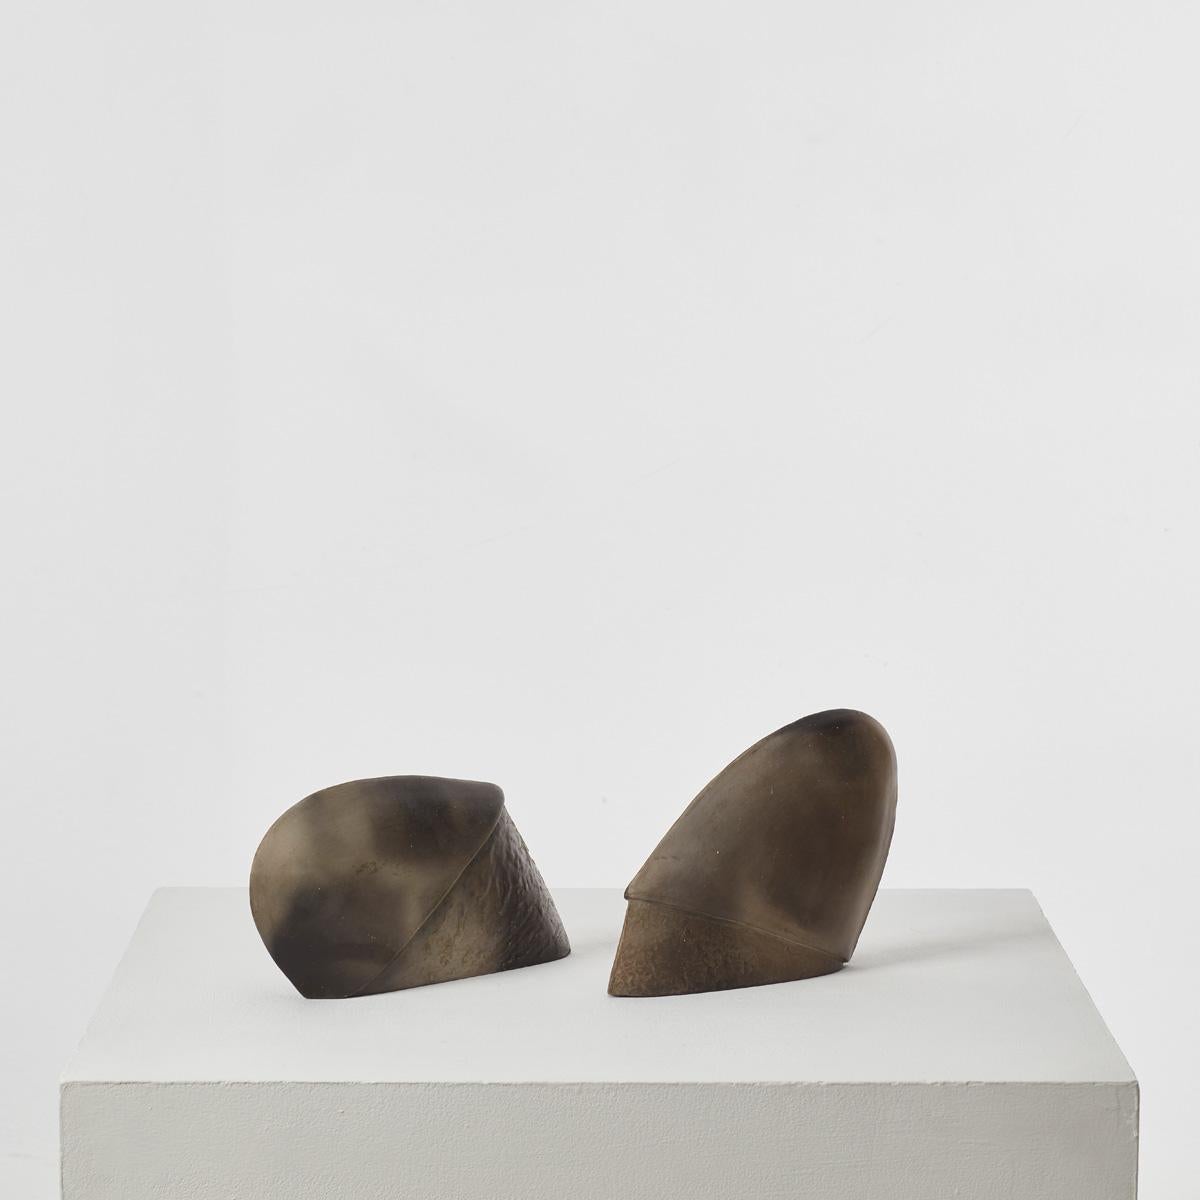 Pair of Two-Tone Organic Sculptures from the Collection of Sir Terence Conran In Good Condition For Sale In London, GB